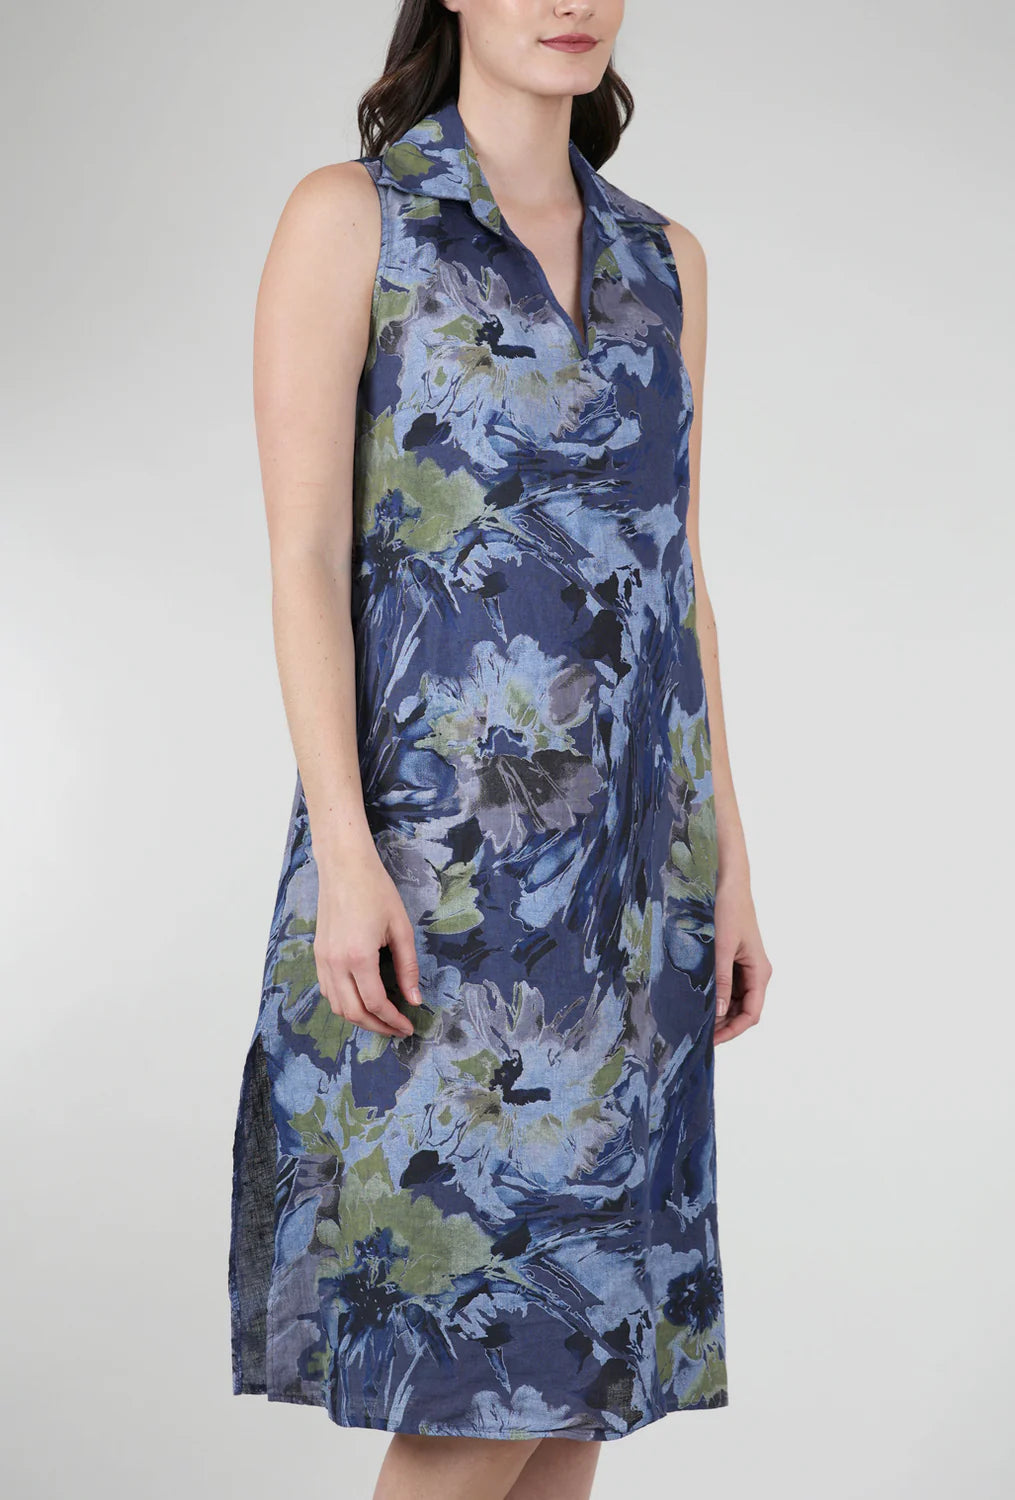 Painted Floral Linen Dress by Lands Downunder in Indigo